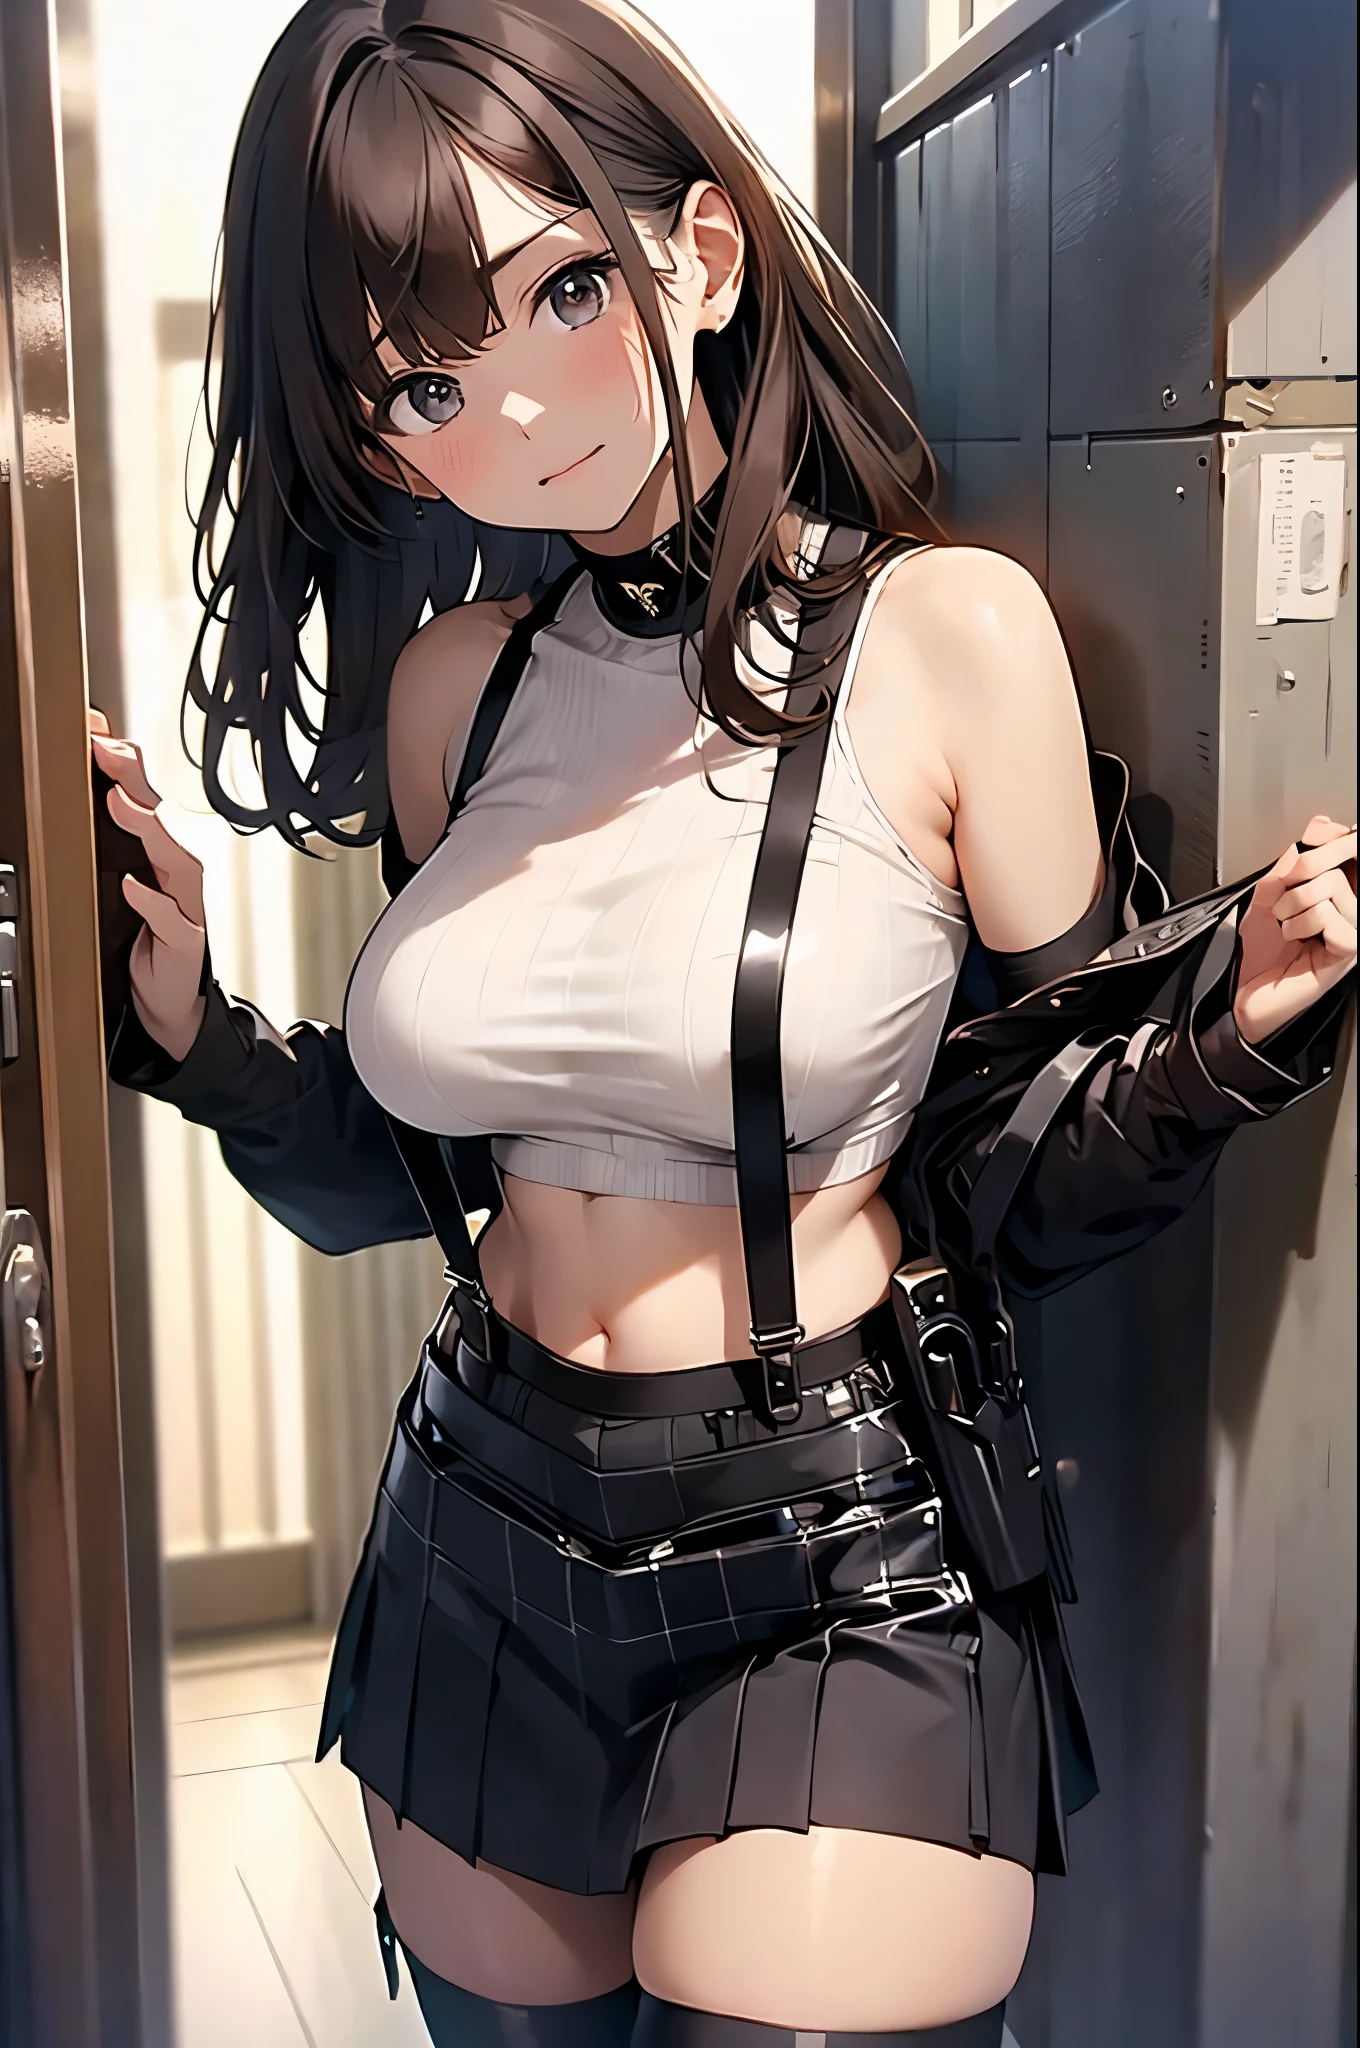 Brown hair、watching at viewers　　　black suspenders　　　Bulging big breasts　　 　 　　　walls: 　Black miniskirt　garters　　　　　　Gaze　　　Small face　bangss 　　　holster　　　Beautuful Women　　hands up　　レッグholster ベッドに横たわる　　Gaze 　black boots panty shot　provocation　flank　flank汗　soio 　arm